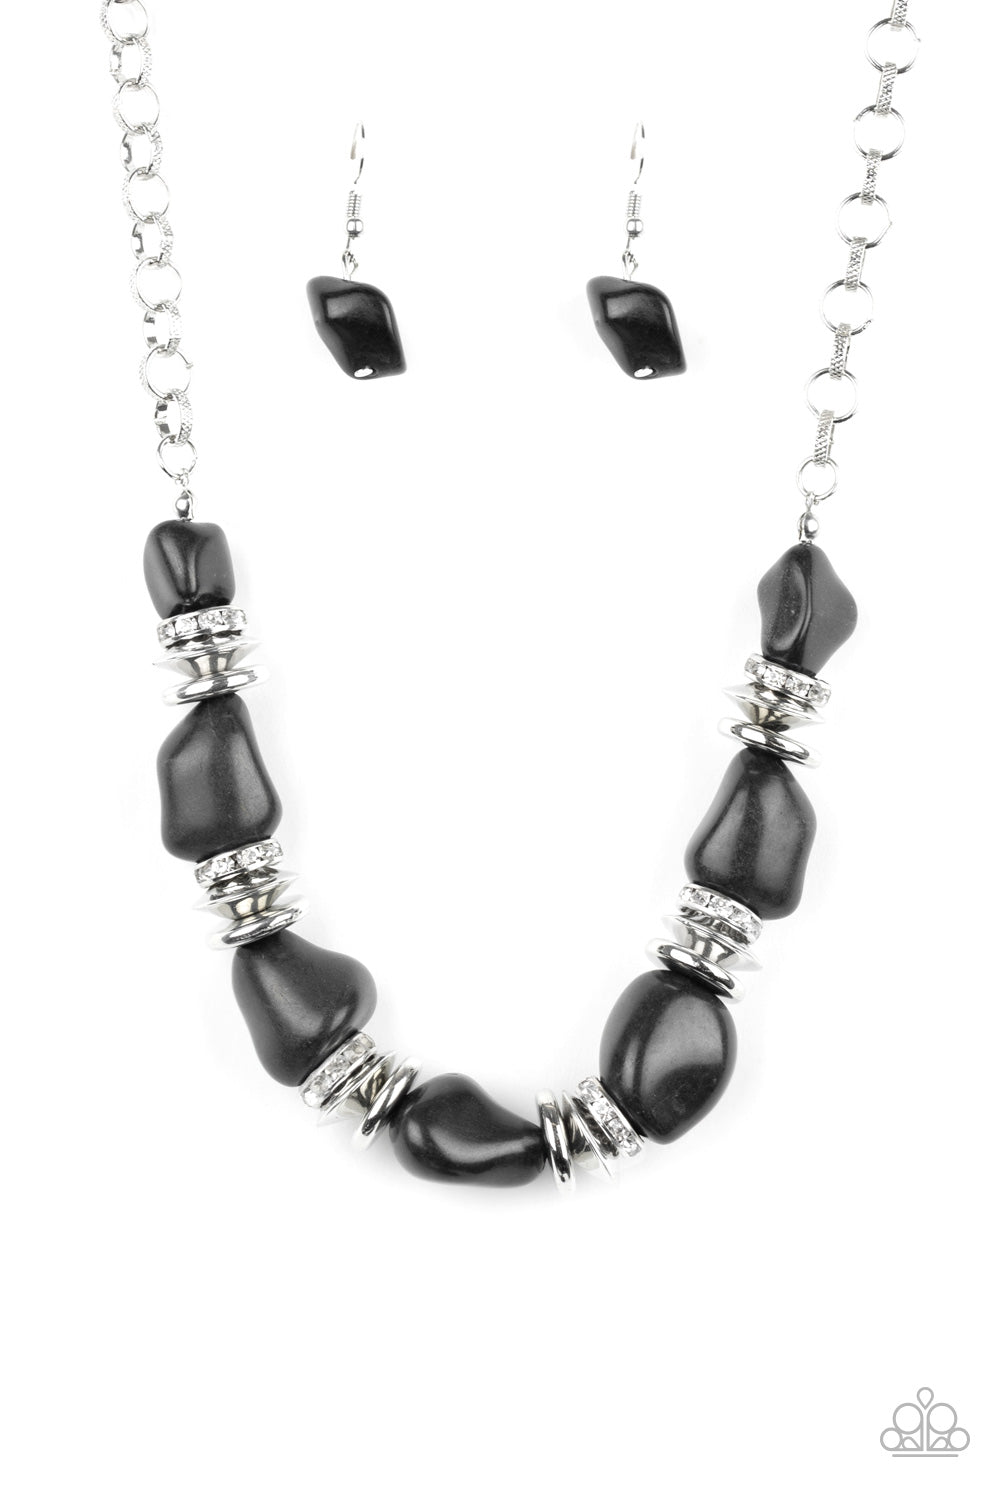 Stunningly Stone Age Paparazzi Accessories Necklace with Earrings